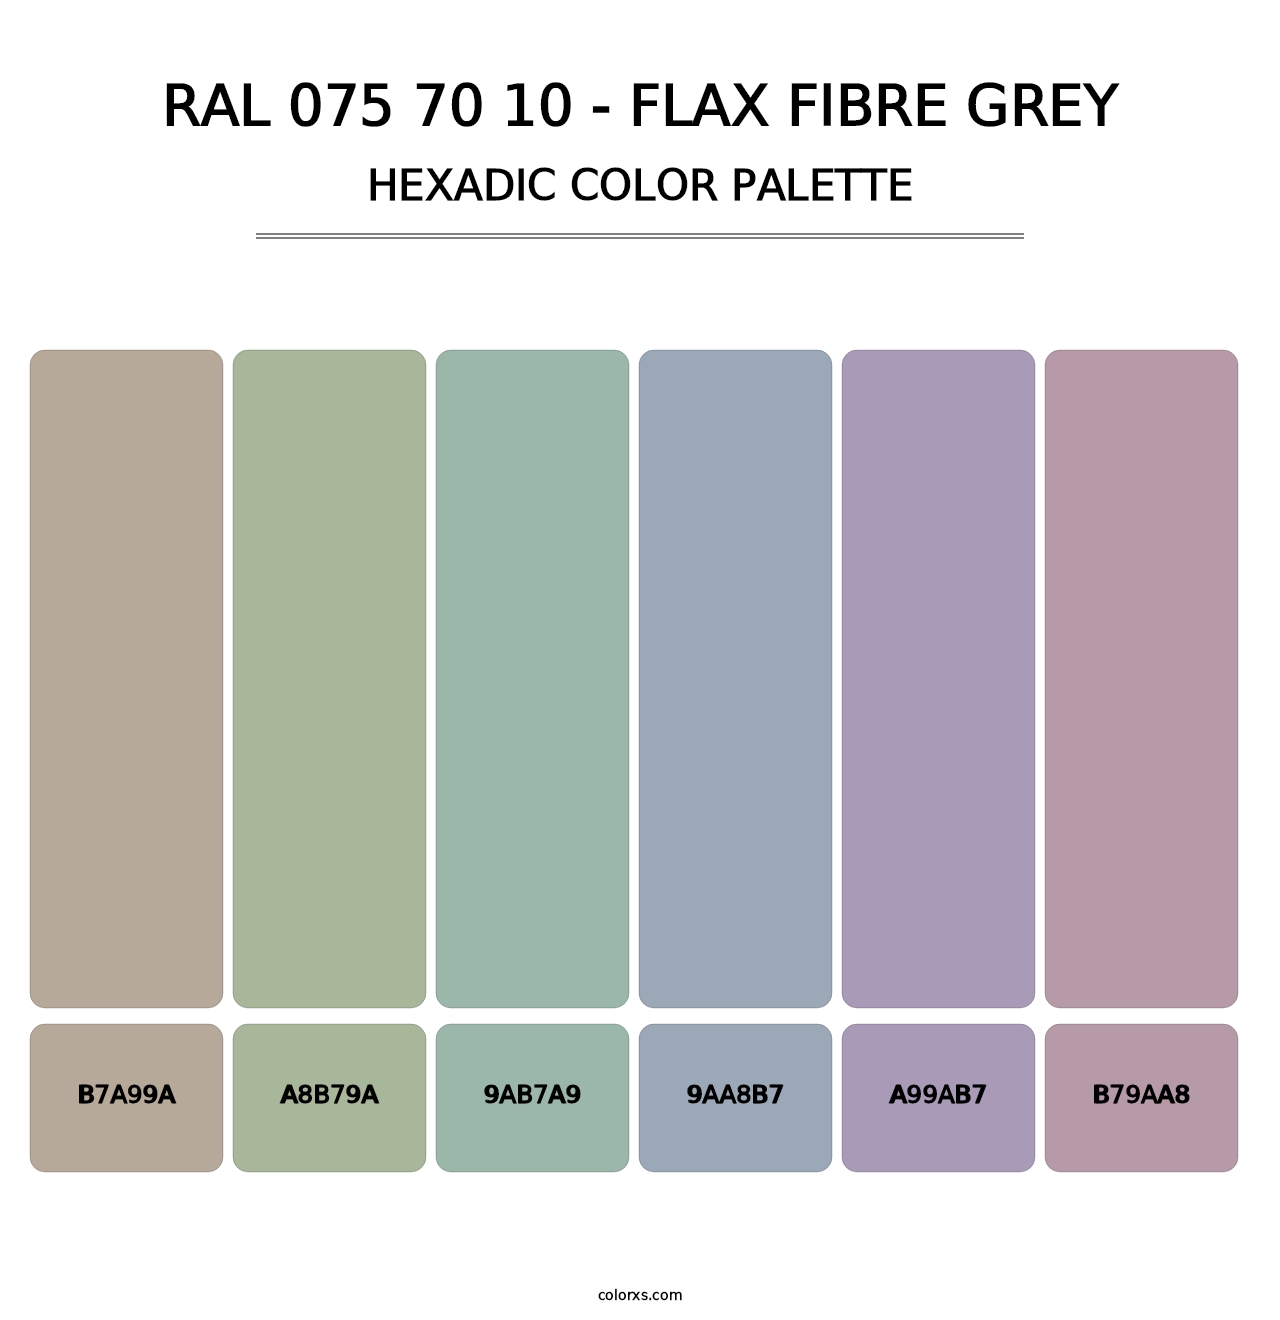 RAL 075 70 10 - Flax Fibre Grey - Hexadic Color Palette